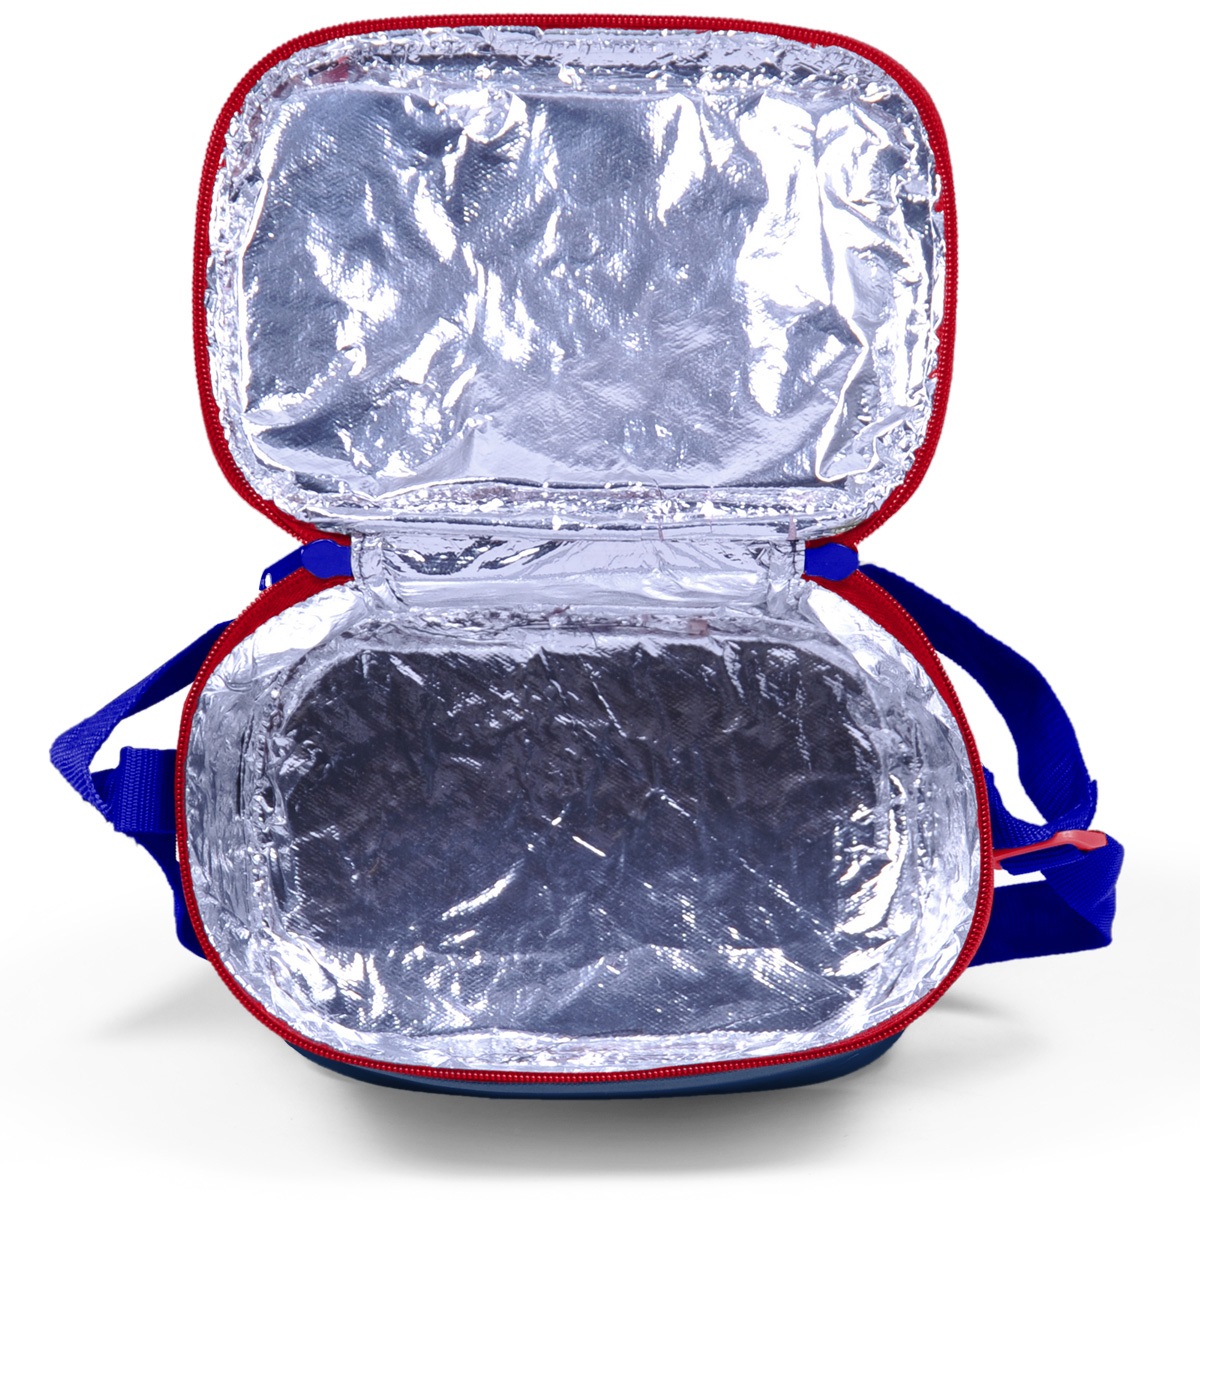 Coral High Sport Thermal Lunch Bag - Dark Blue Red